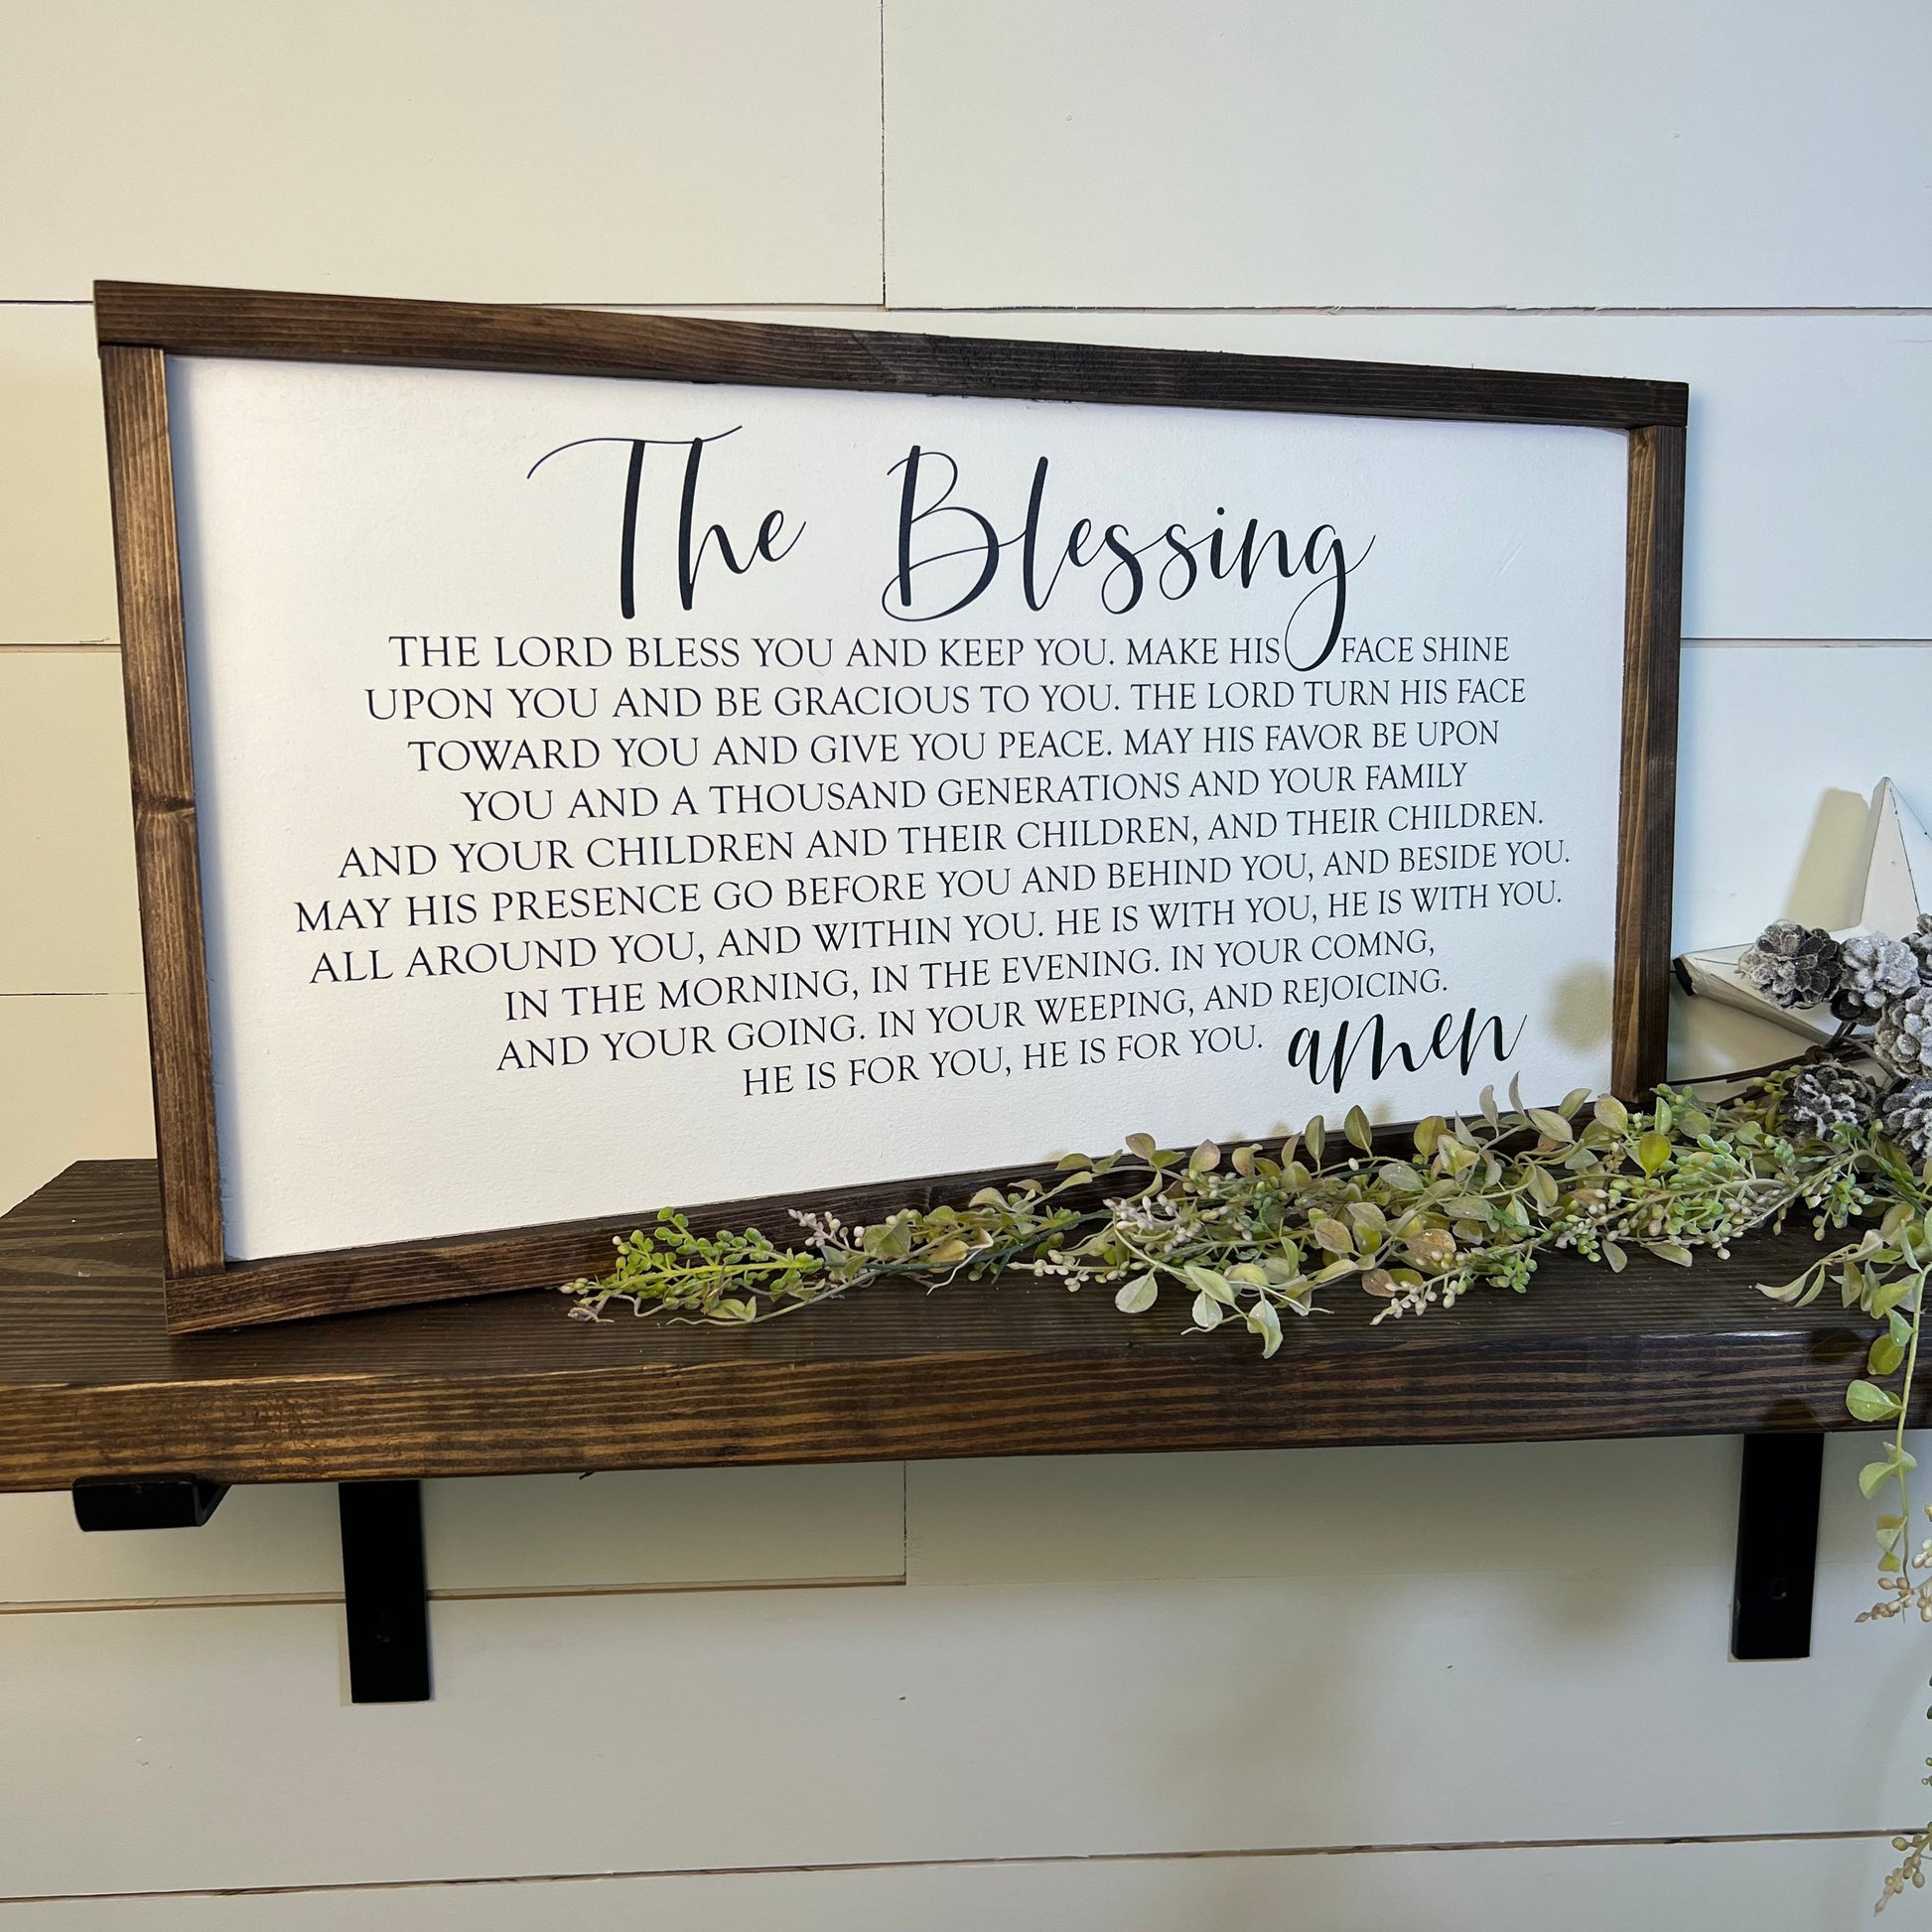 the blessing - wood sign - mantle decor [FREE SHIPPING!]